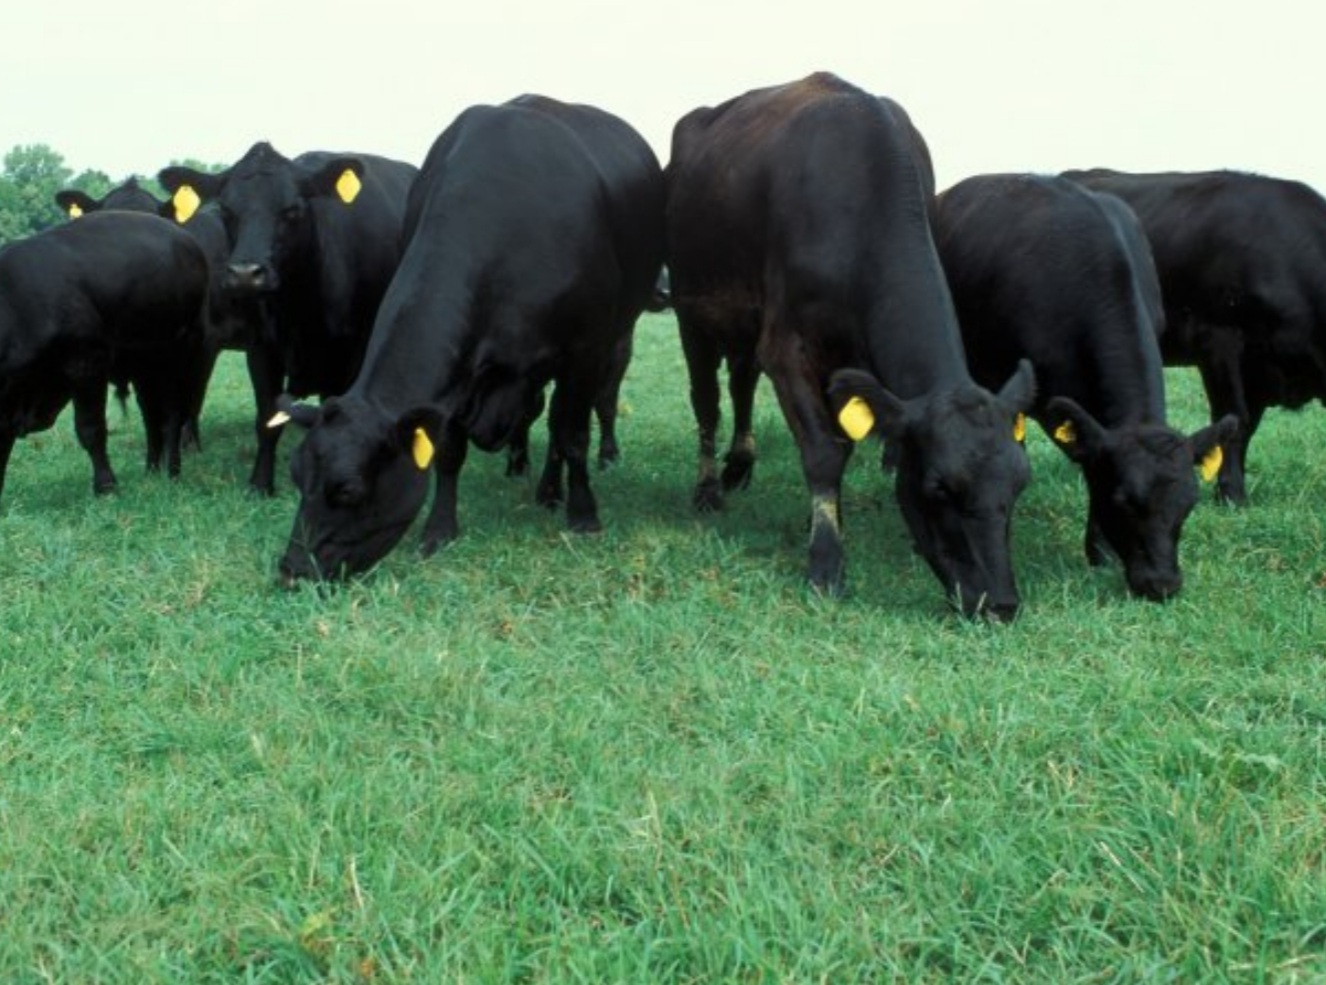 METHANE GAS AND LIVESTOCK FARMS – A WIN FOR AGRICULTURE